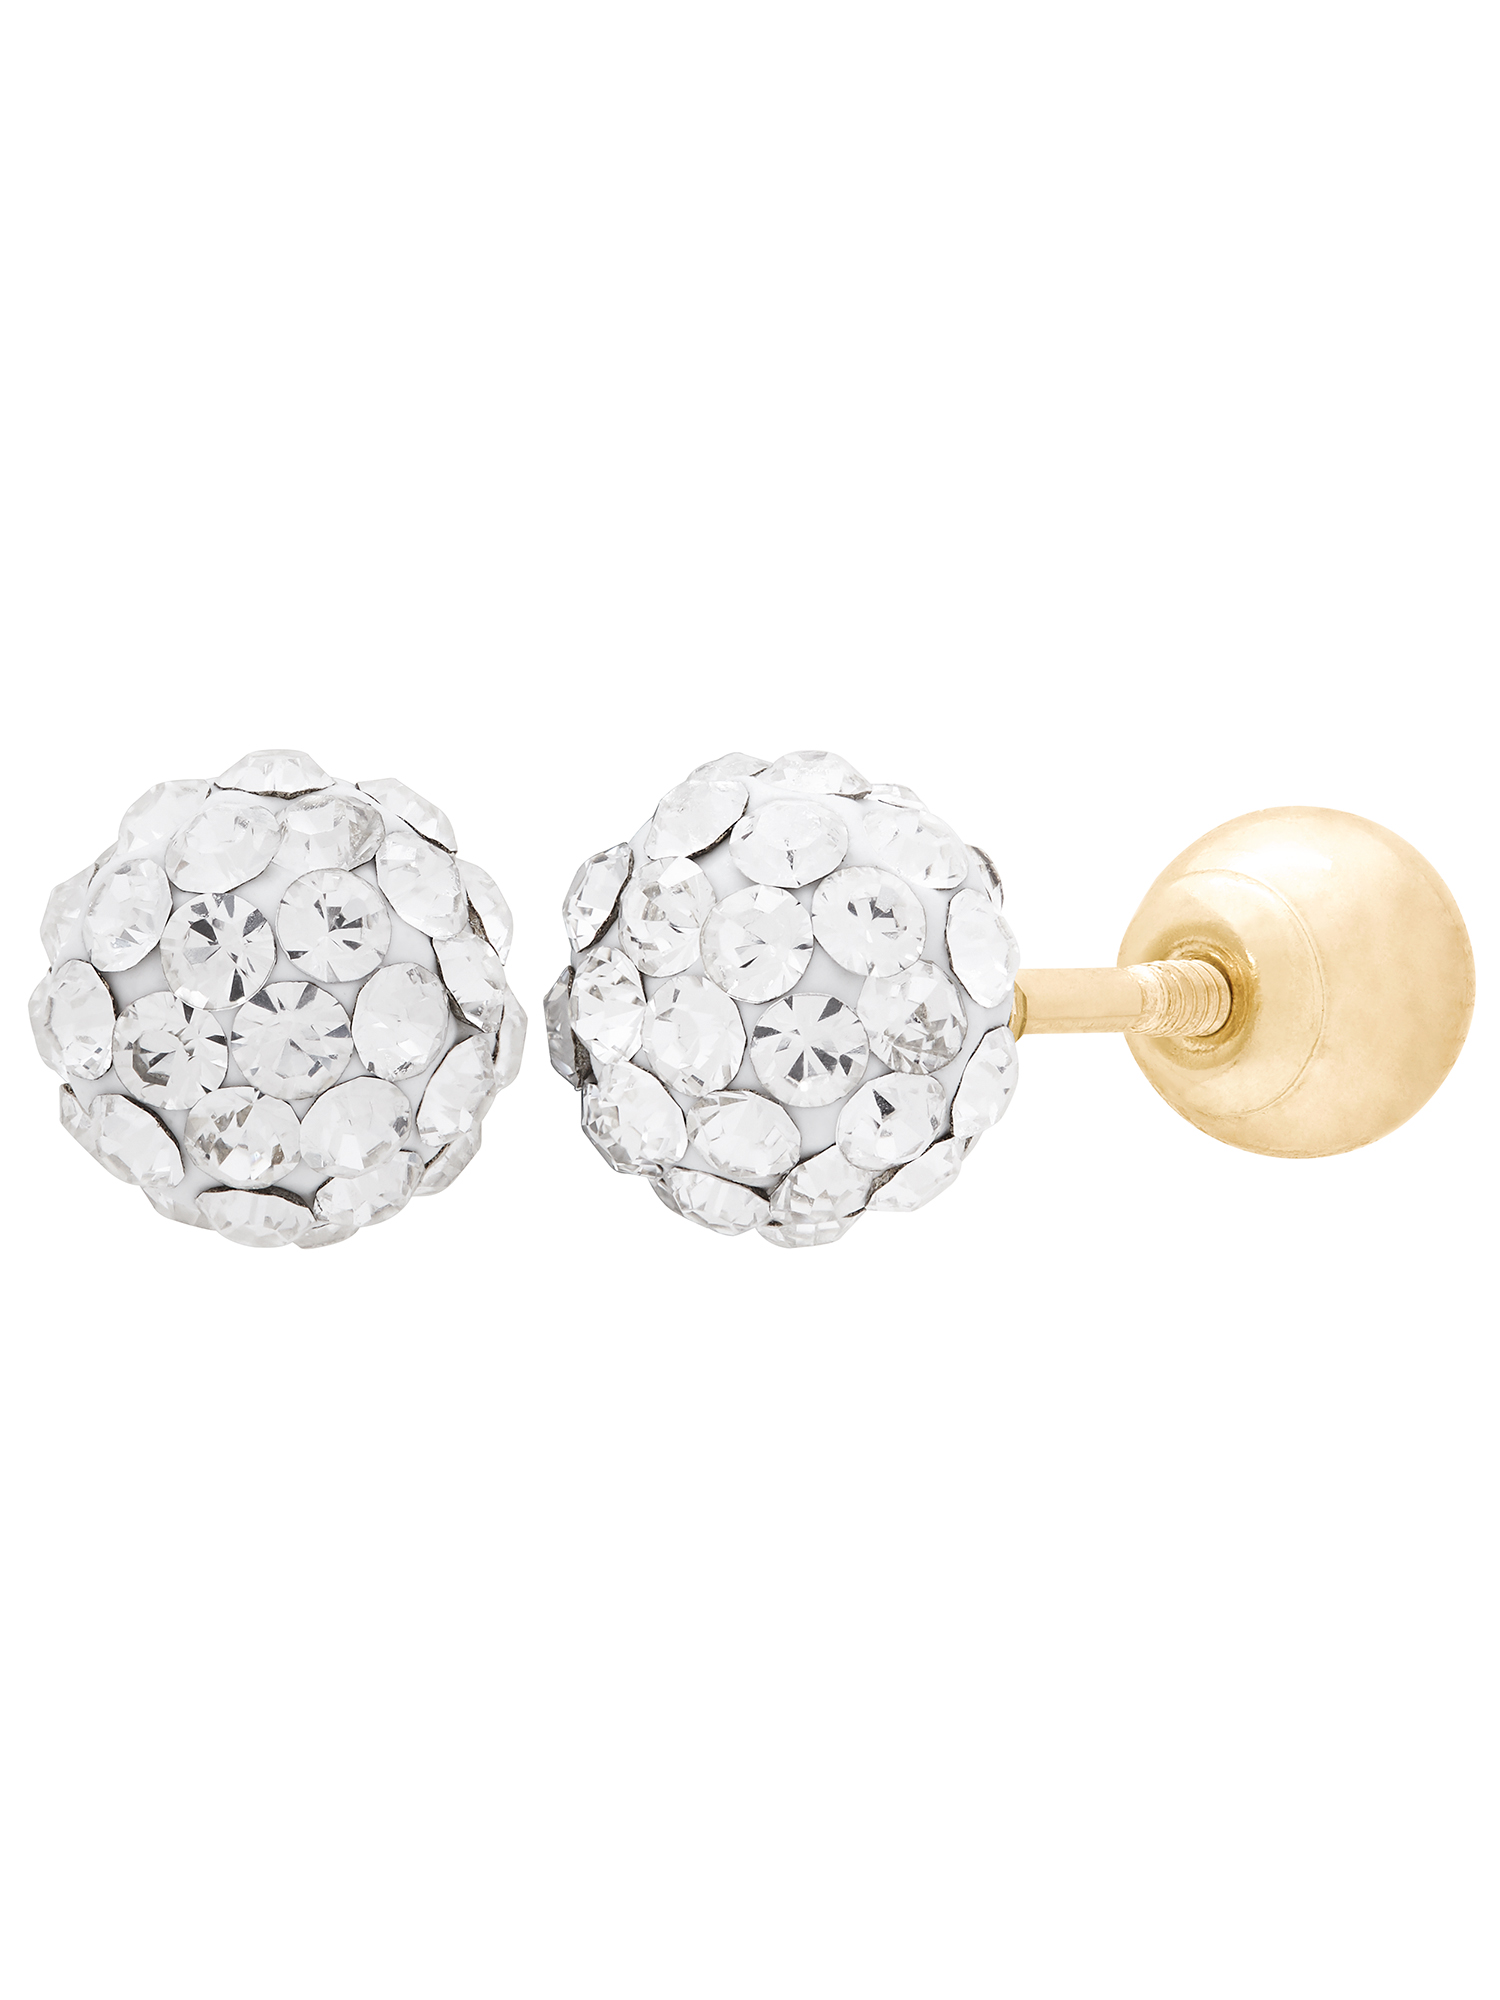 Brilliance Fine Jewelry White Crystals 4.8MM Studs in 10K Yellow Gold Earrings - image 4 of 4